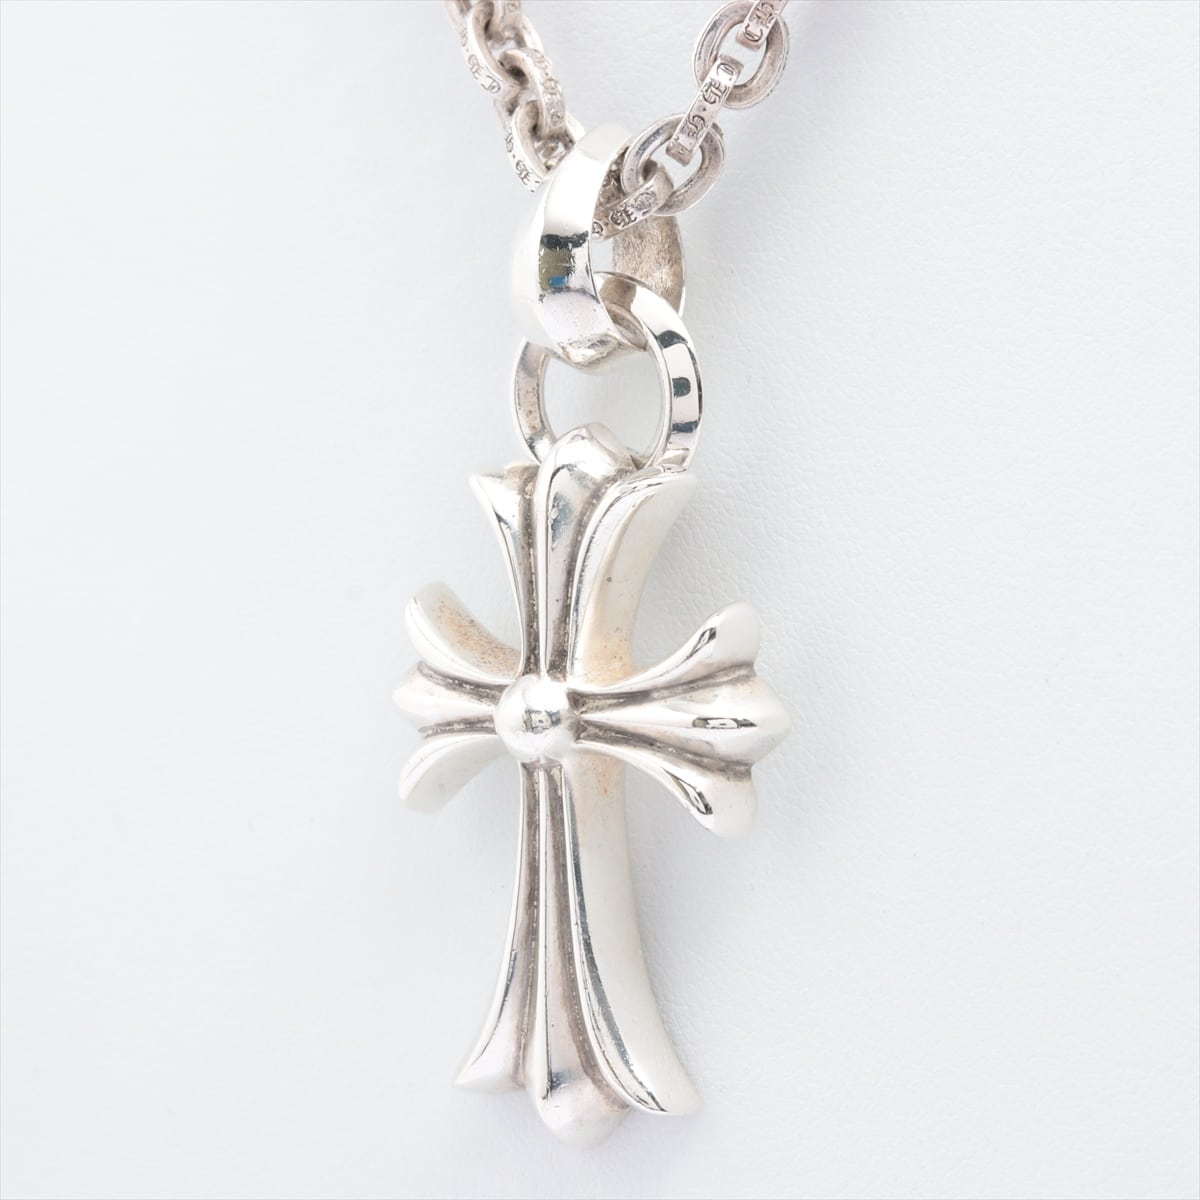 Chrome Hearts CH Cross Pendant Small Pendant 925 59.2g With invoice  w/bail Paper Chain 20 inches